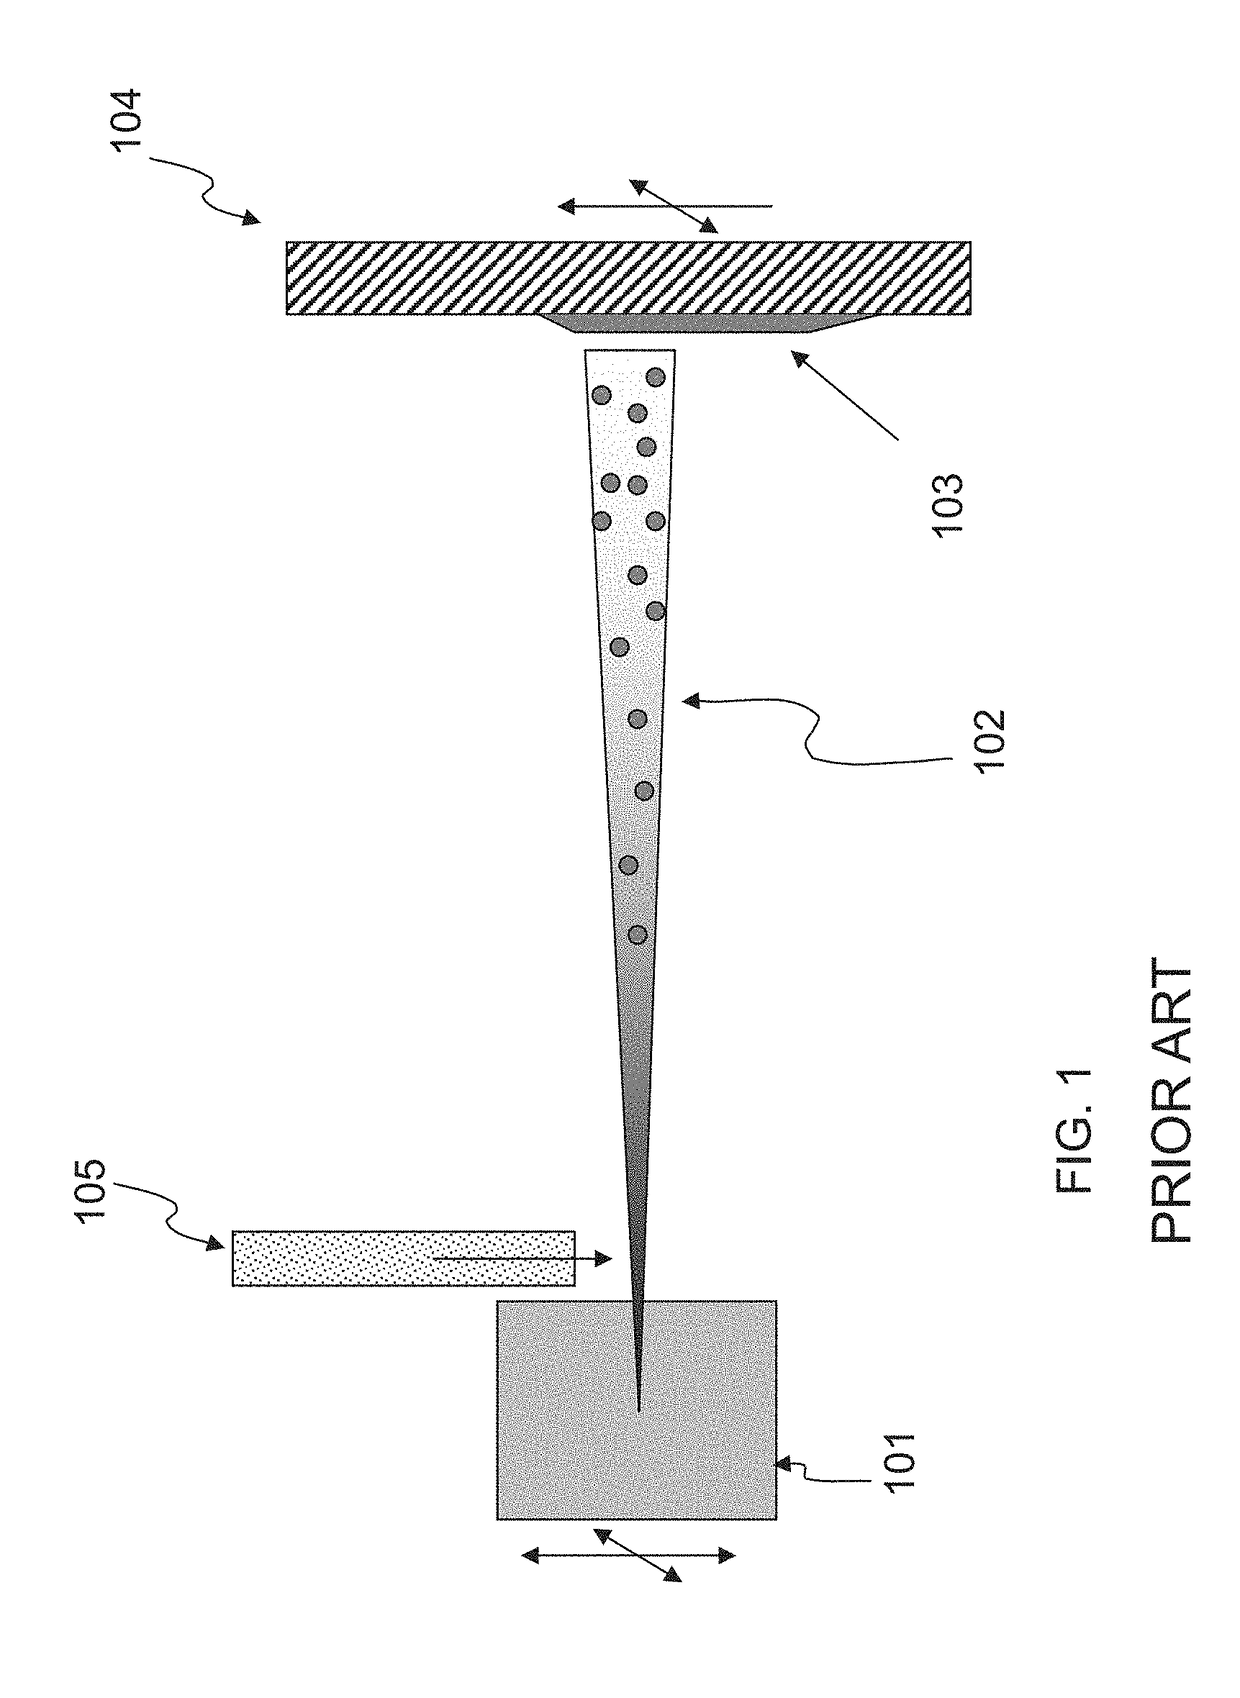 Methods and systems for plasma deposition and treatment